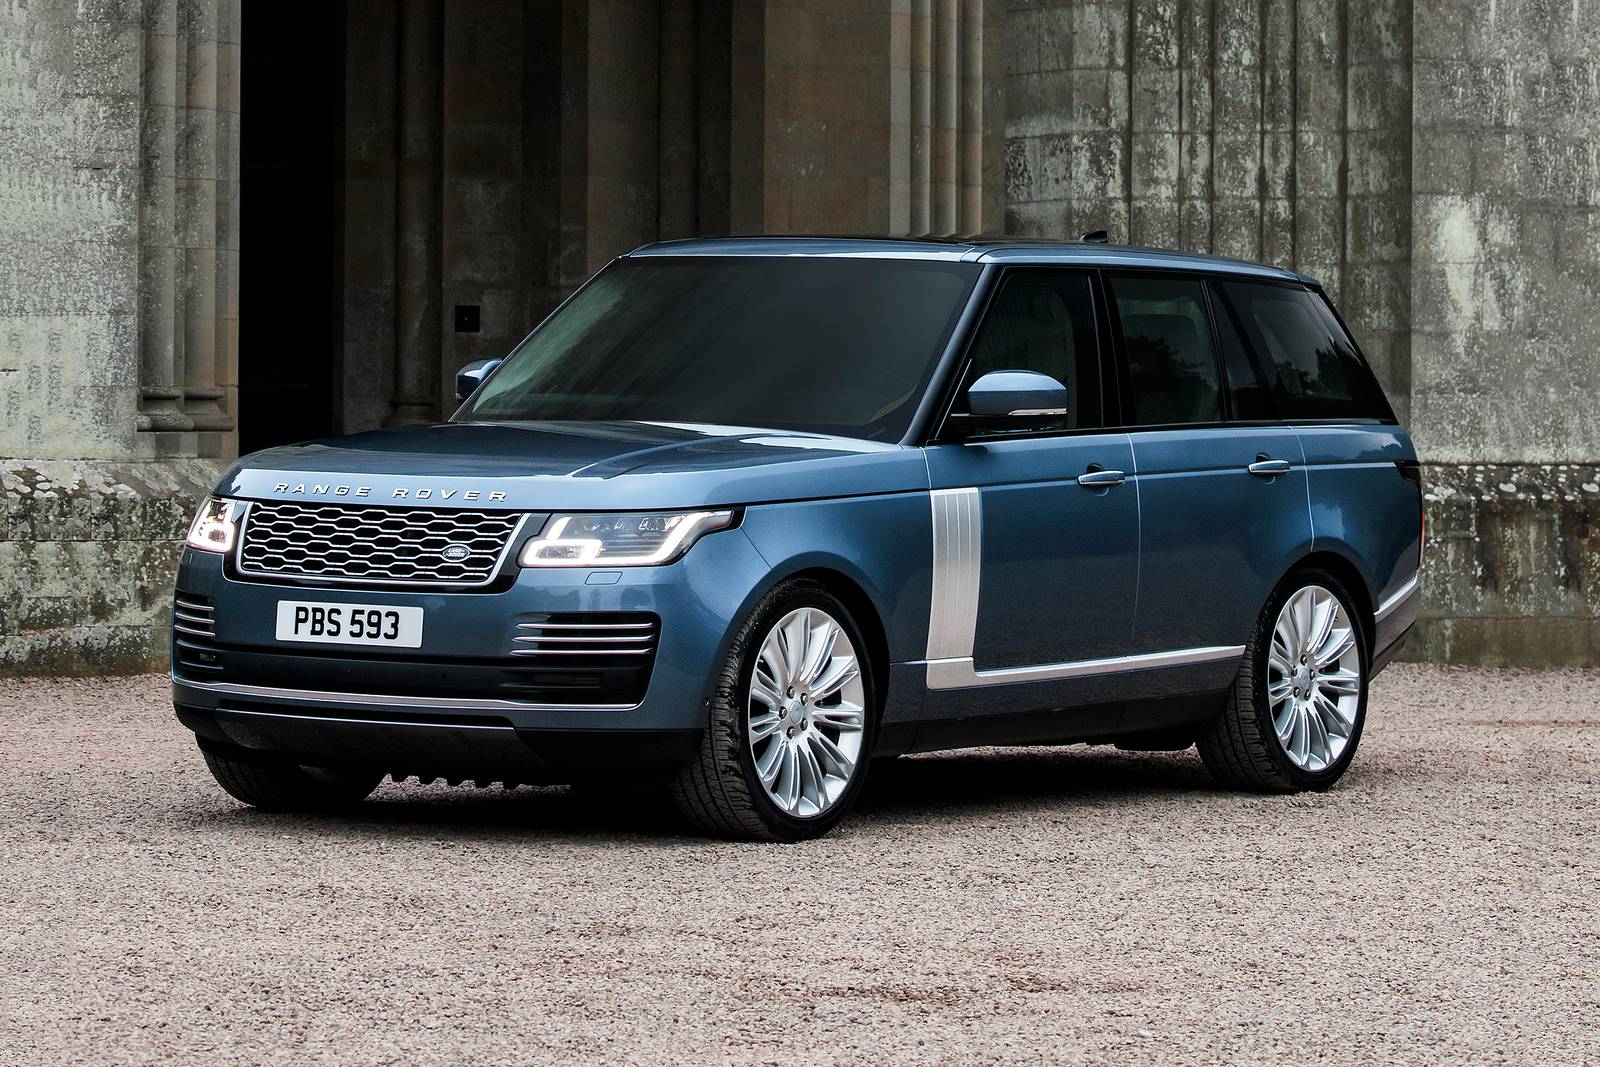 Range Rover Price Gbp  . Looking For Used Land Rover Range Rover Prices?